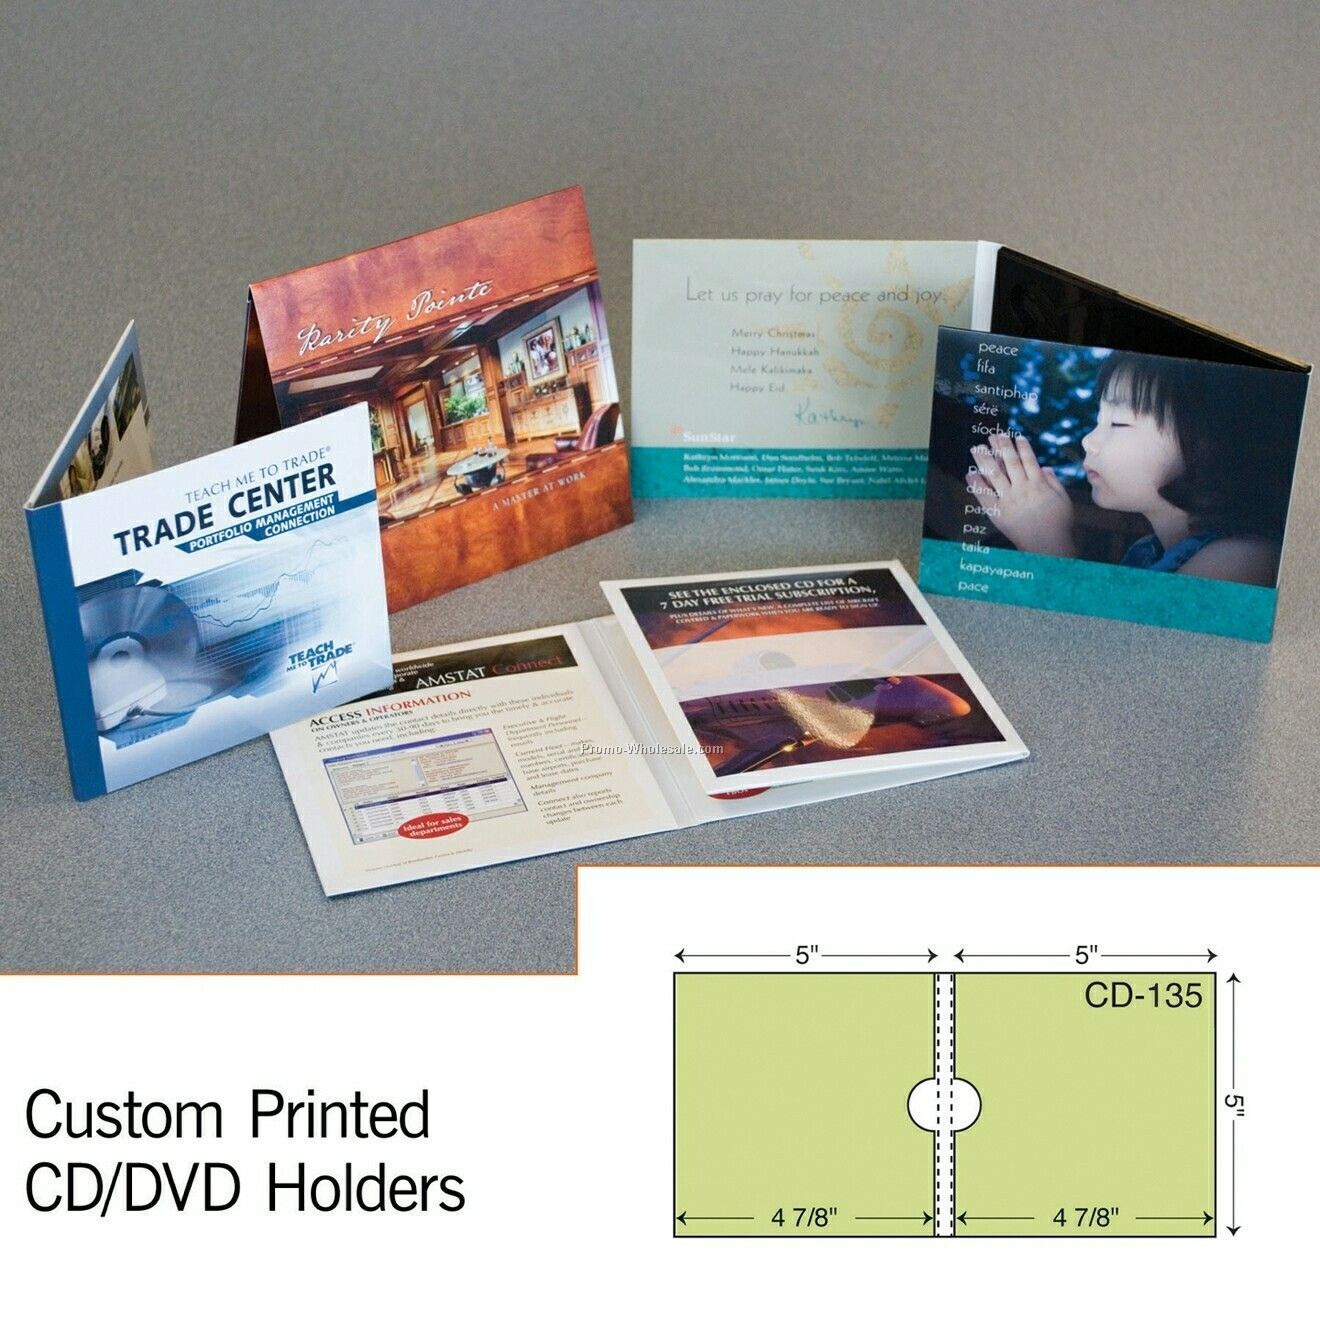 5"x5" CD & Booklet Sleeve W/ 4-7/16" Pocket (4 Color Process)